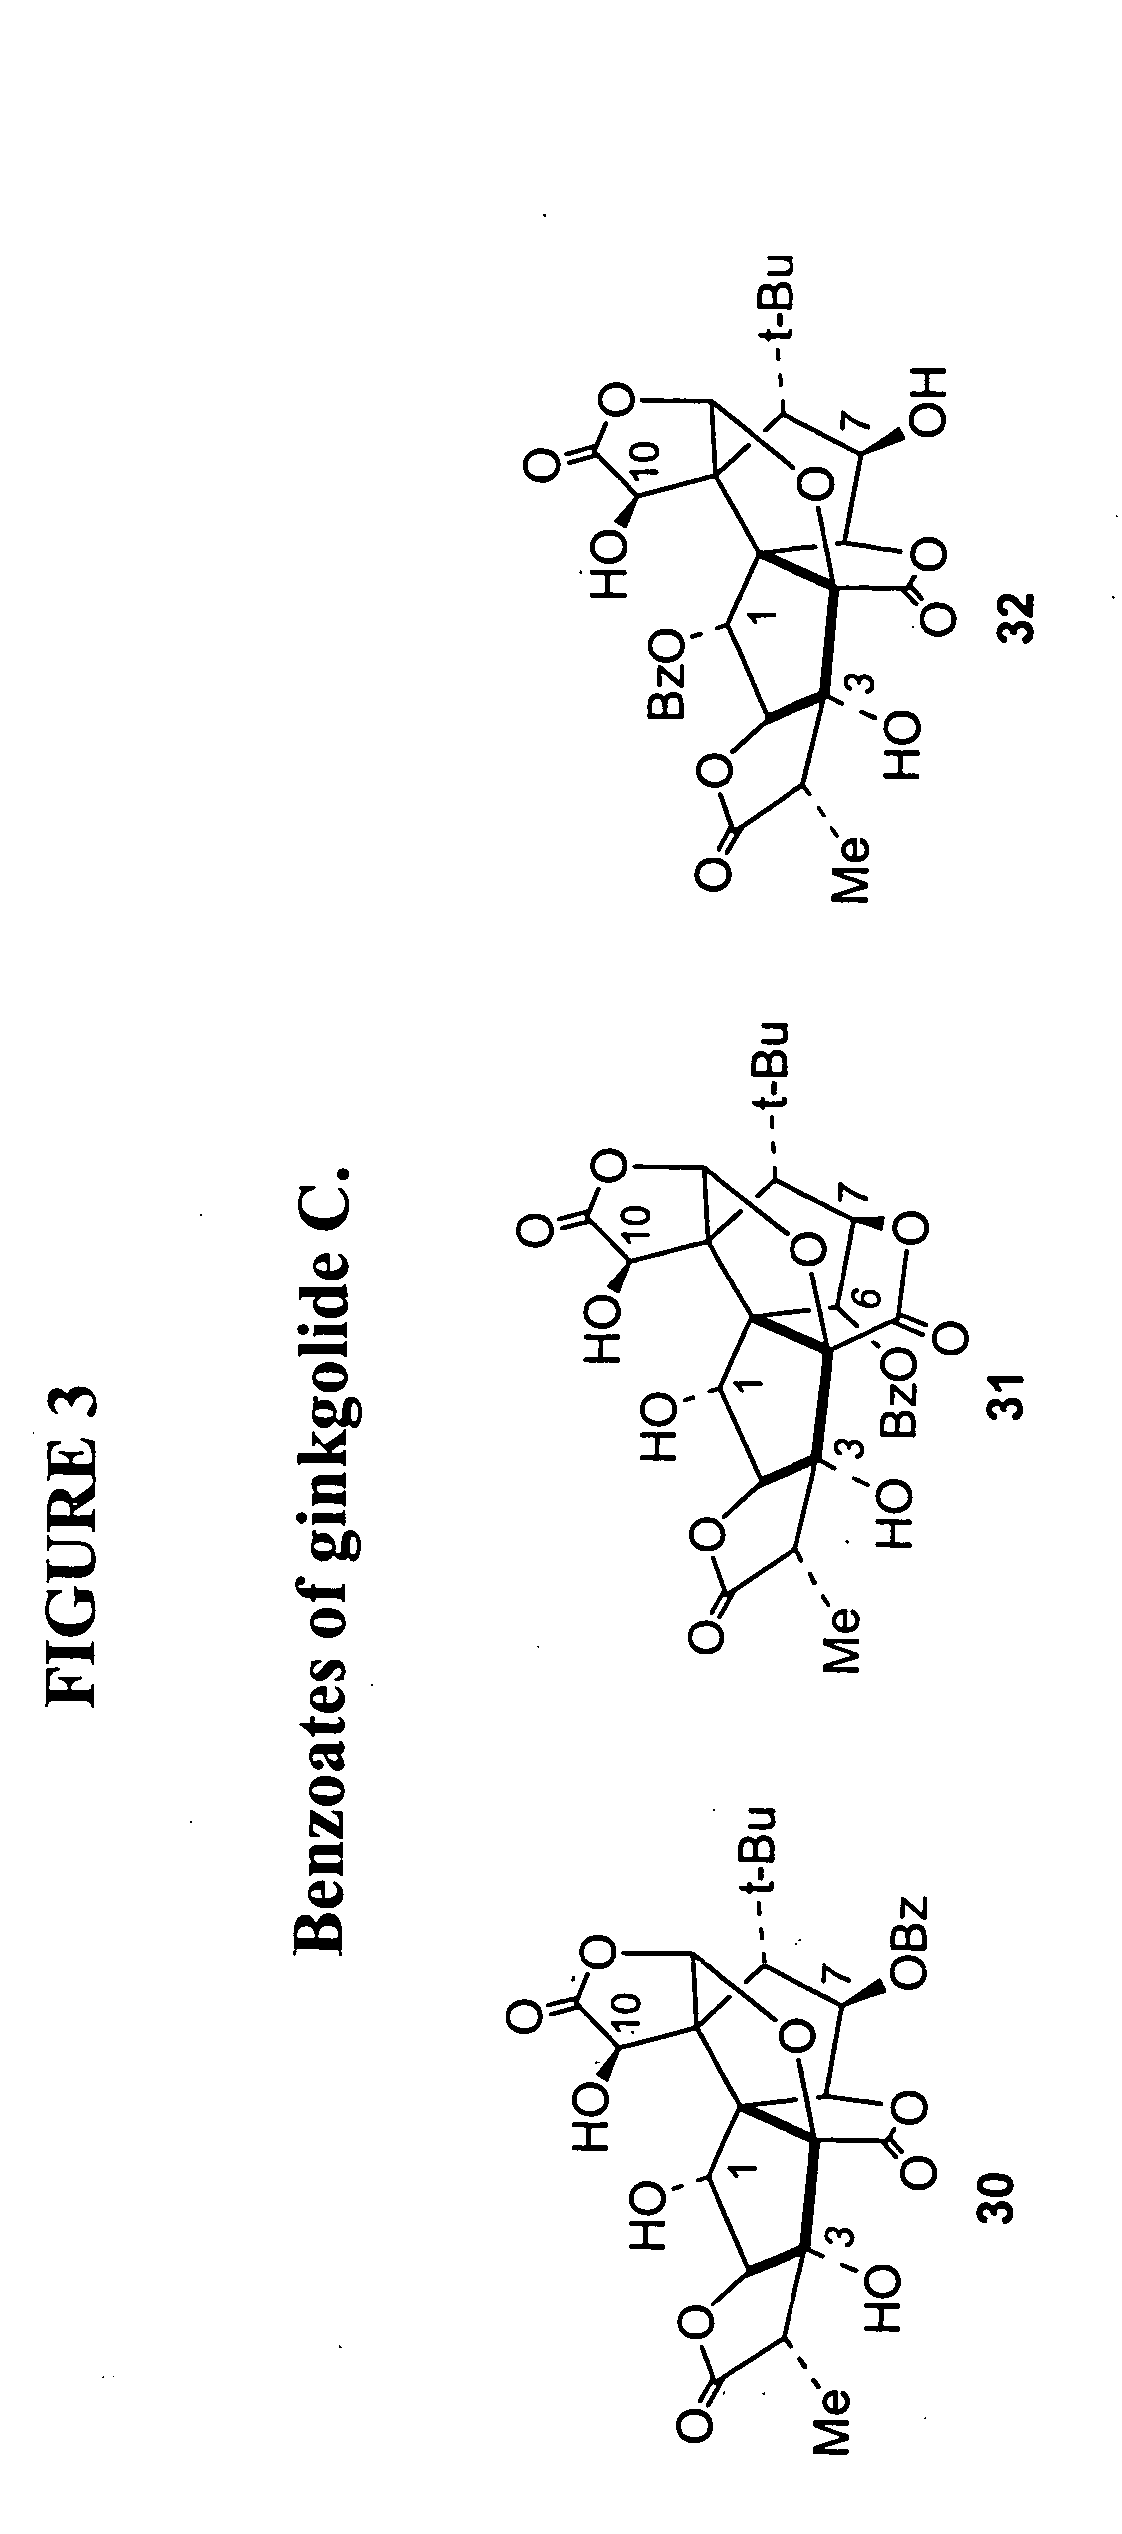 Synthesis of derivatives of ginkgolide C